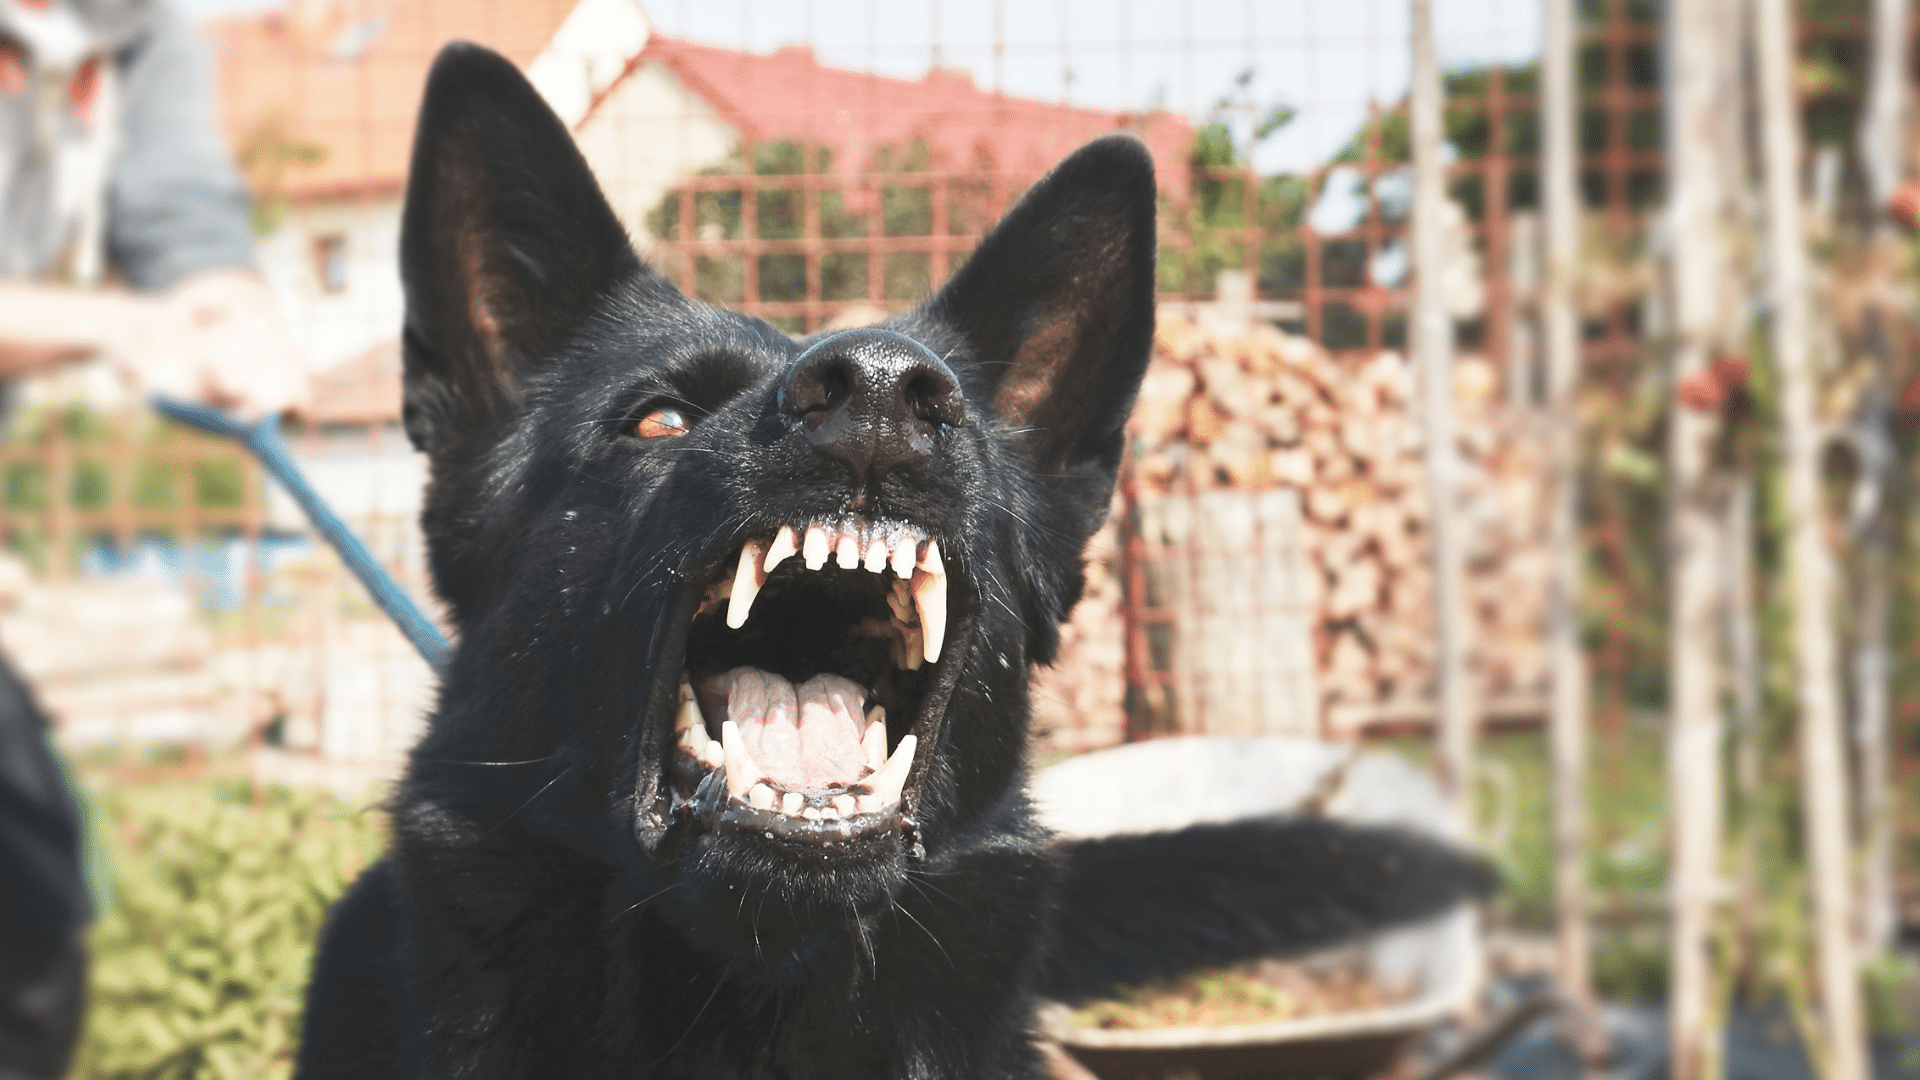 Filing a Personal Injury Claim after a Dog Bite